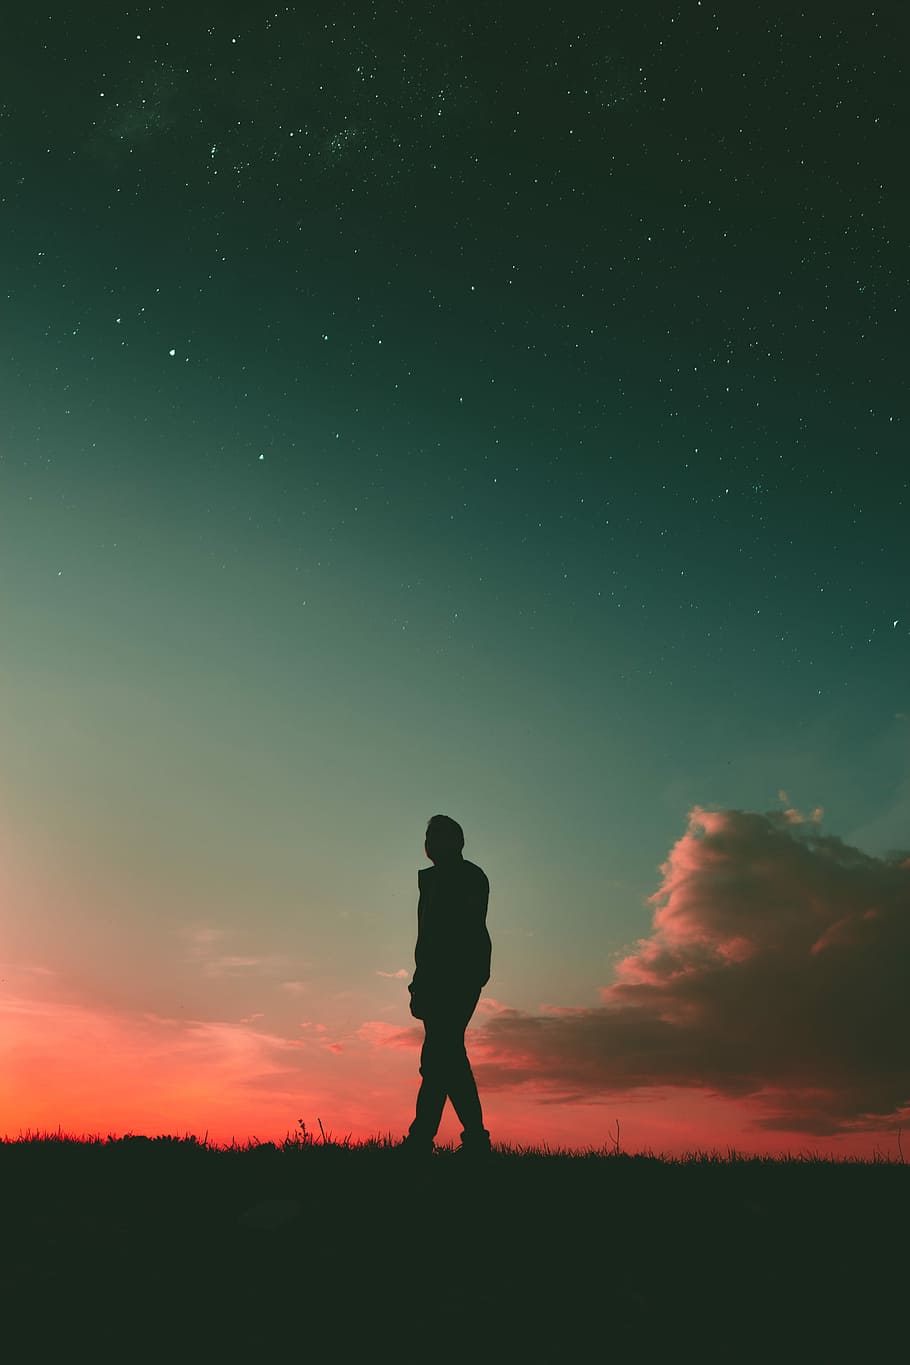 silhouette of man during sunset, silhouette photo of a man standing on grass under cloudy sky during golden hour